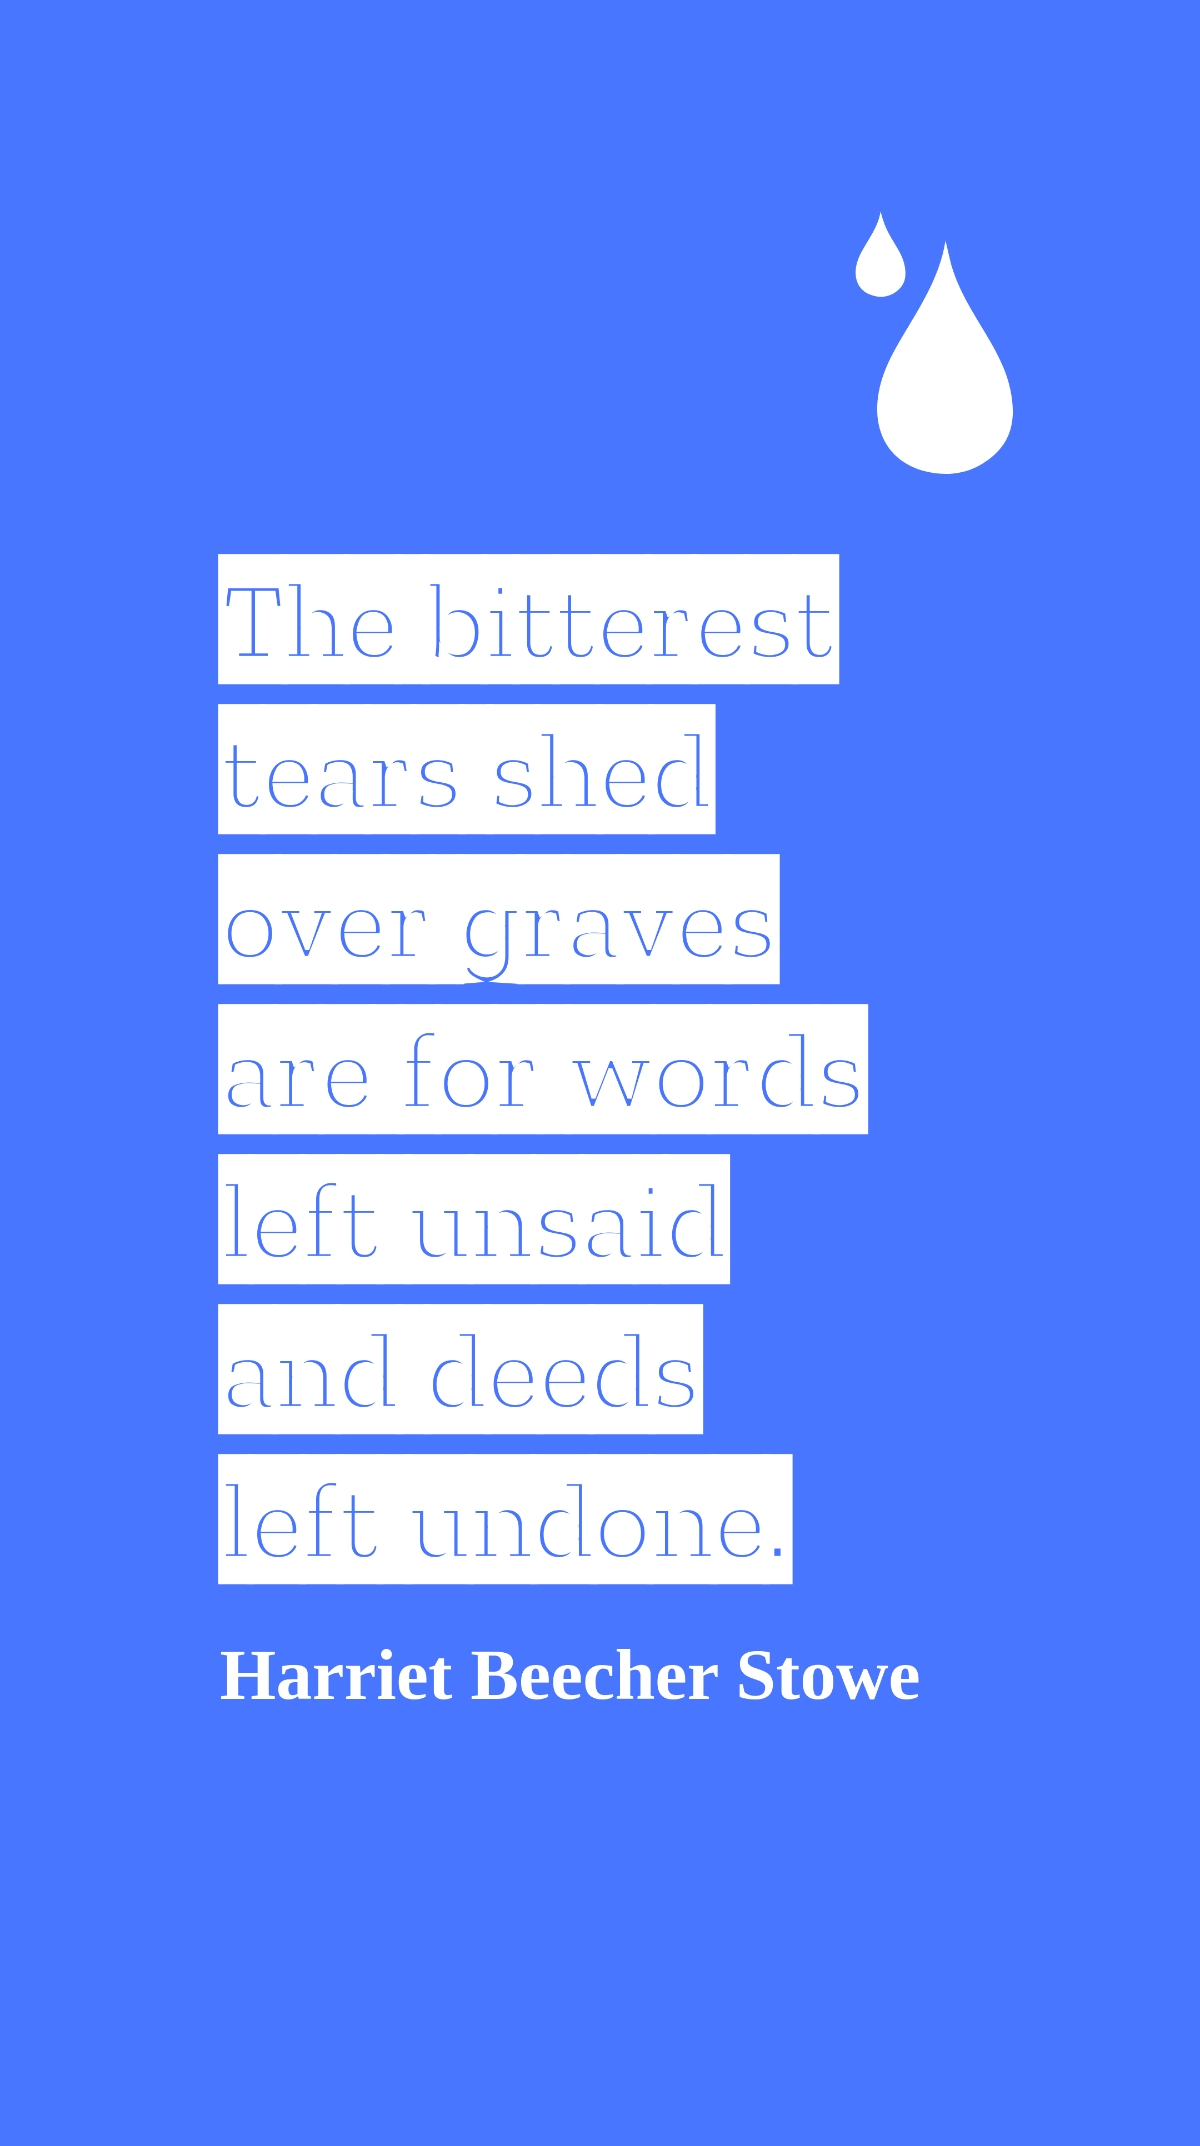 Harriet Beecher Stowe - The bitterest tears shed over graves are for words left unsaid and deeds left undone. Template